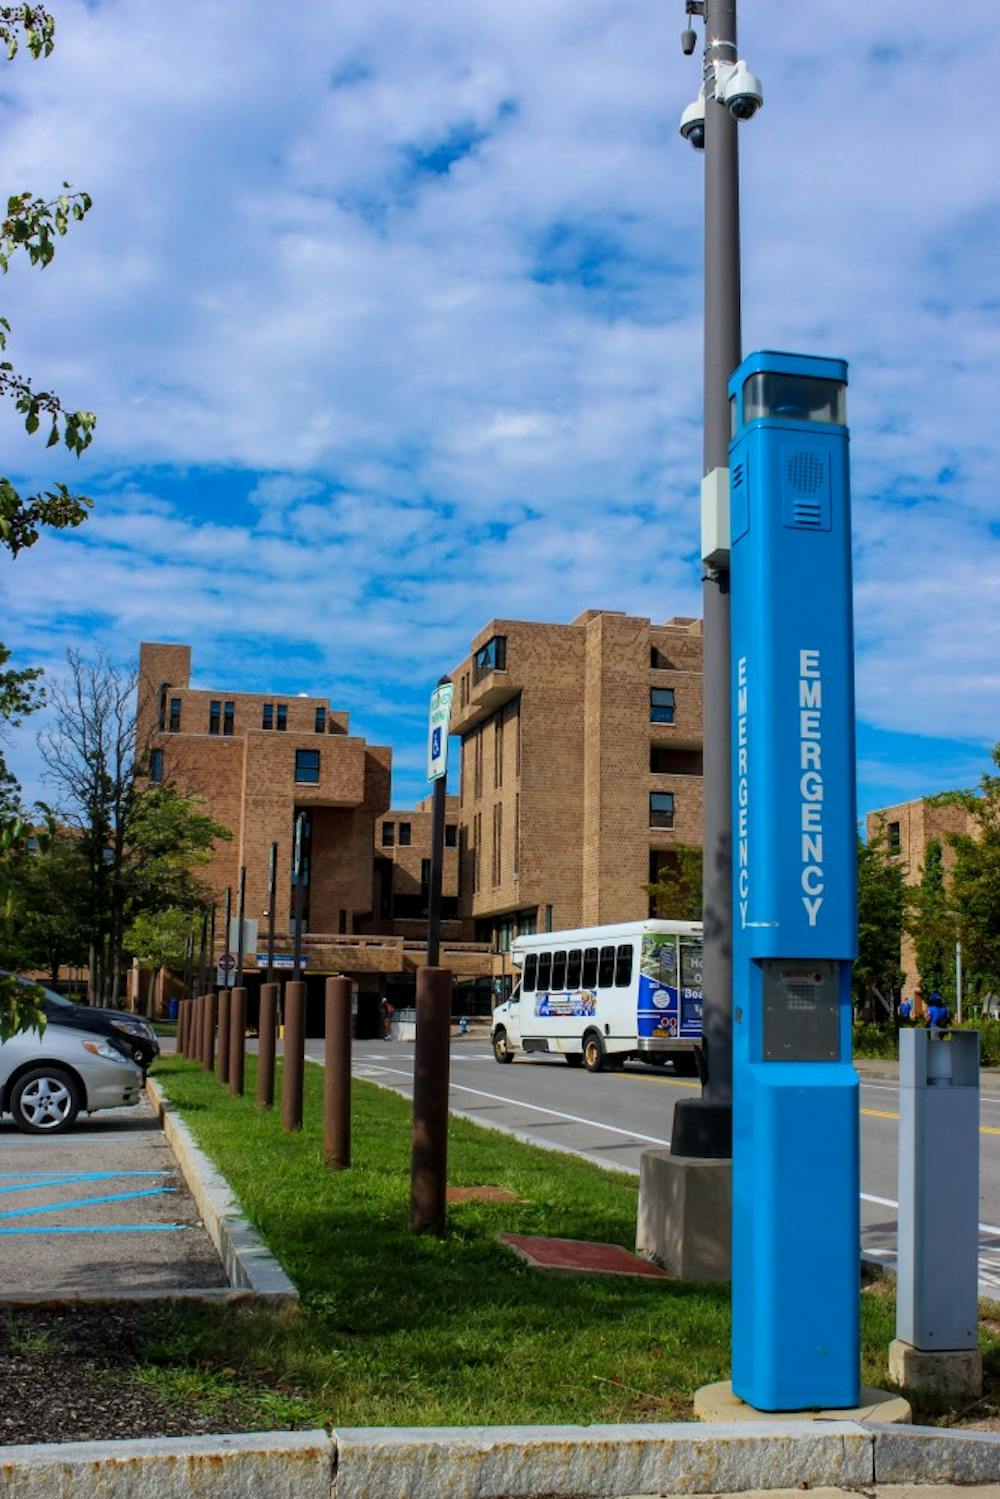 <p>UB’s Blue Light emergency system provides students with additional safety on North and South Campus. But many of the systems are over 10 years old and starting to show signs of wear and tear.&nbsp;</p>